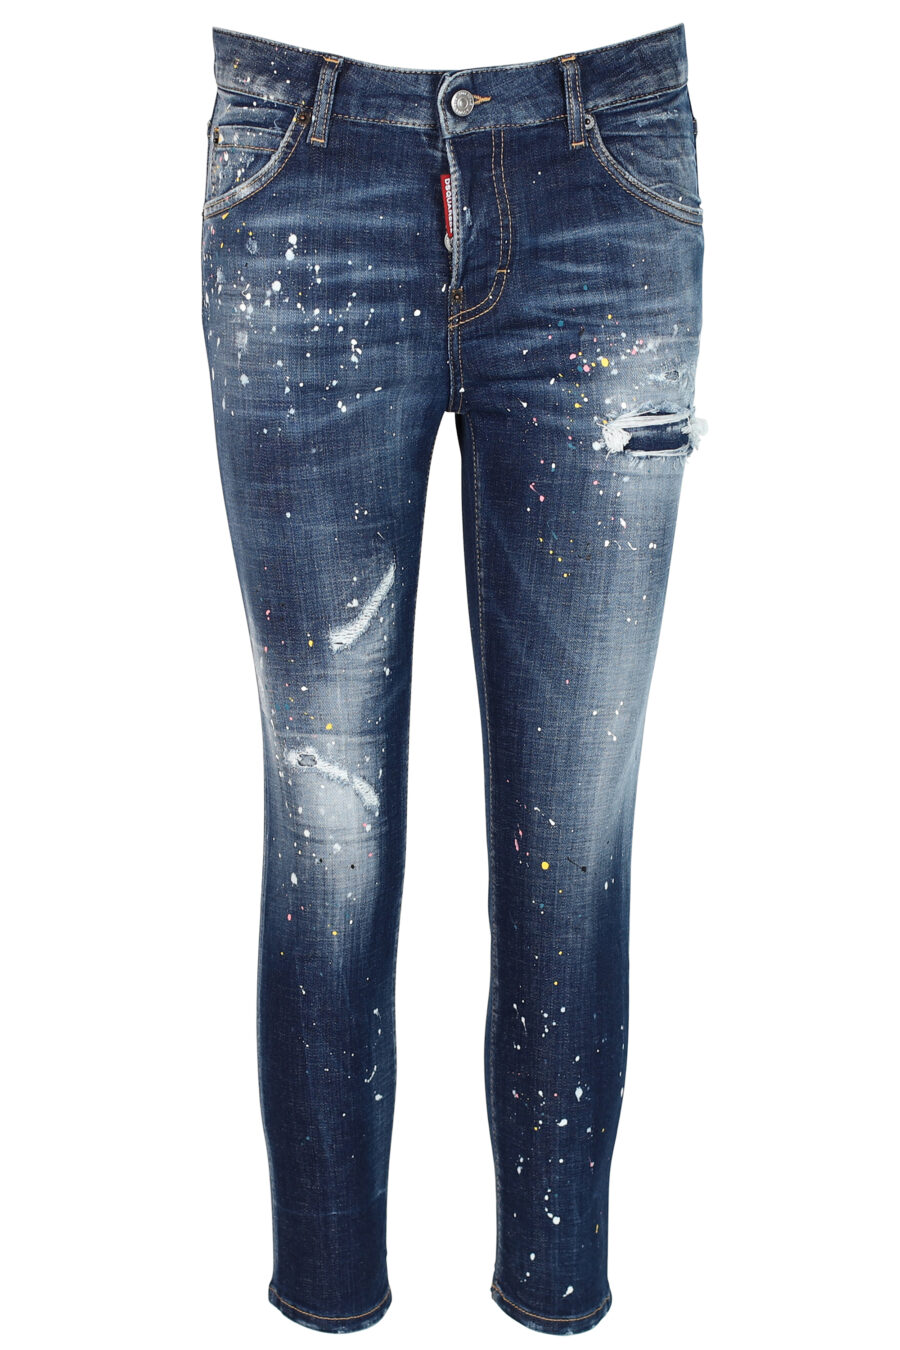 Cool girl cropped jean trousers "Cool girl cropped jean" blue worn with rips - 8052134942512